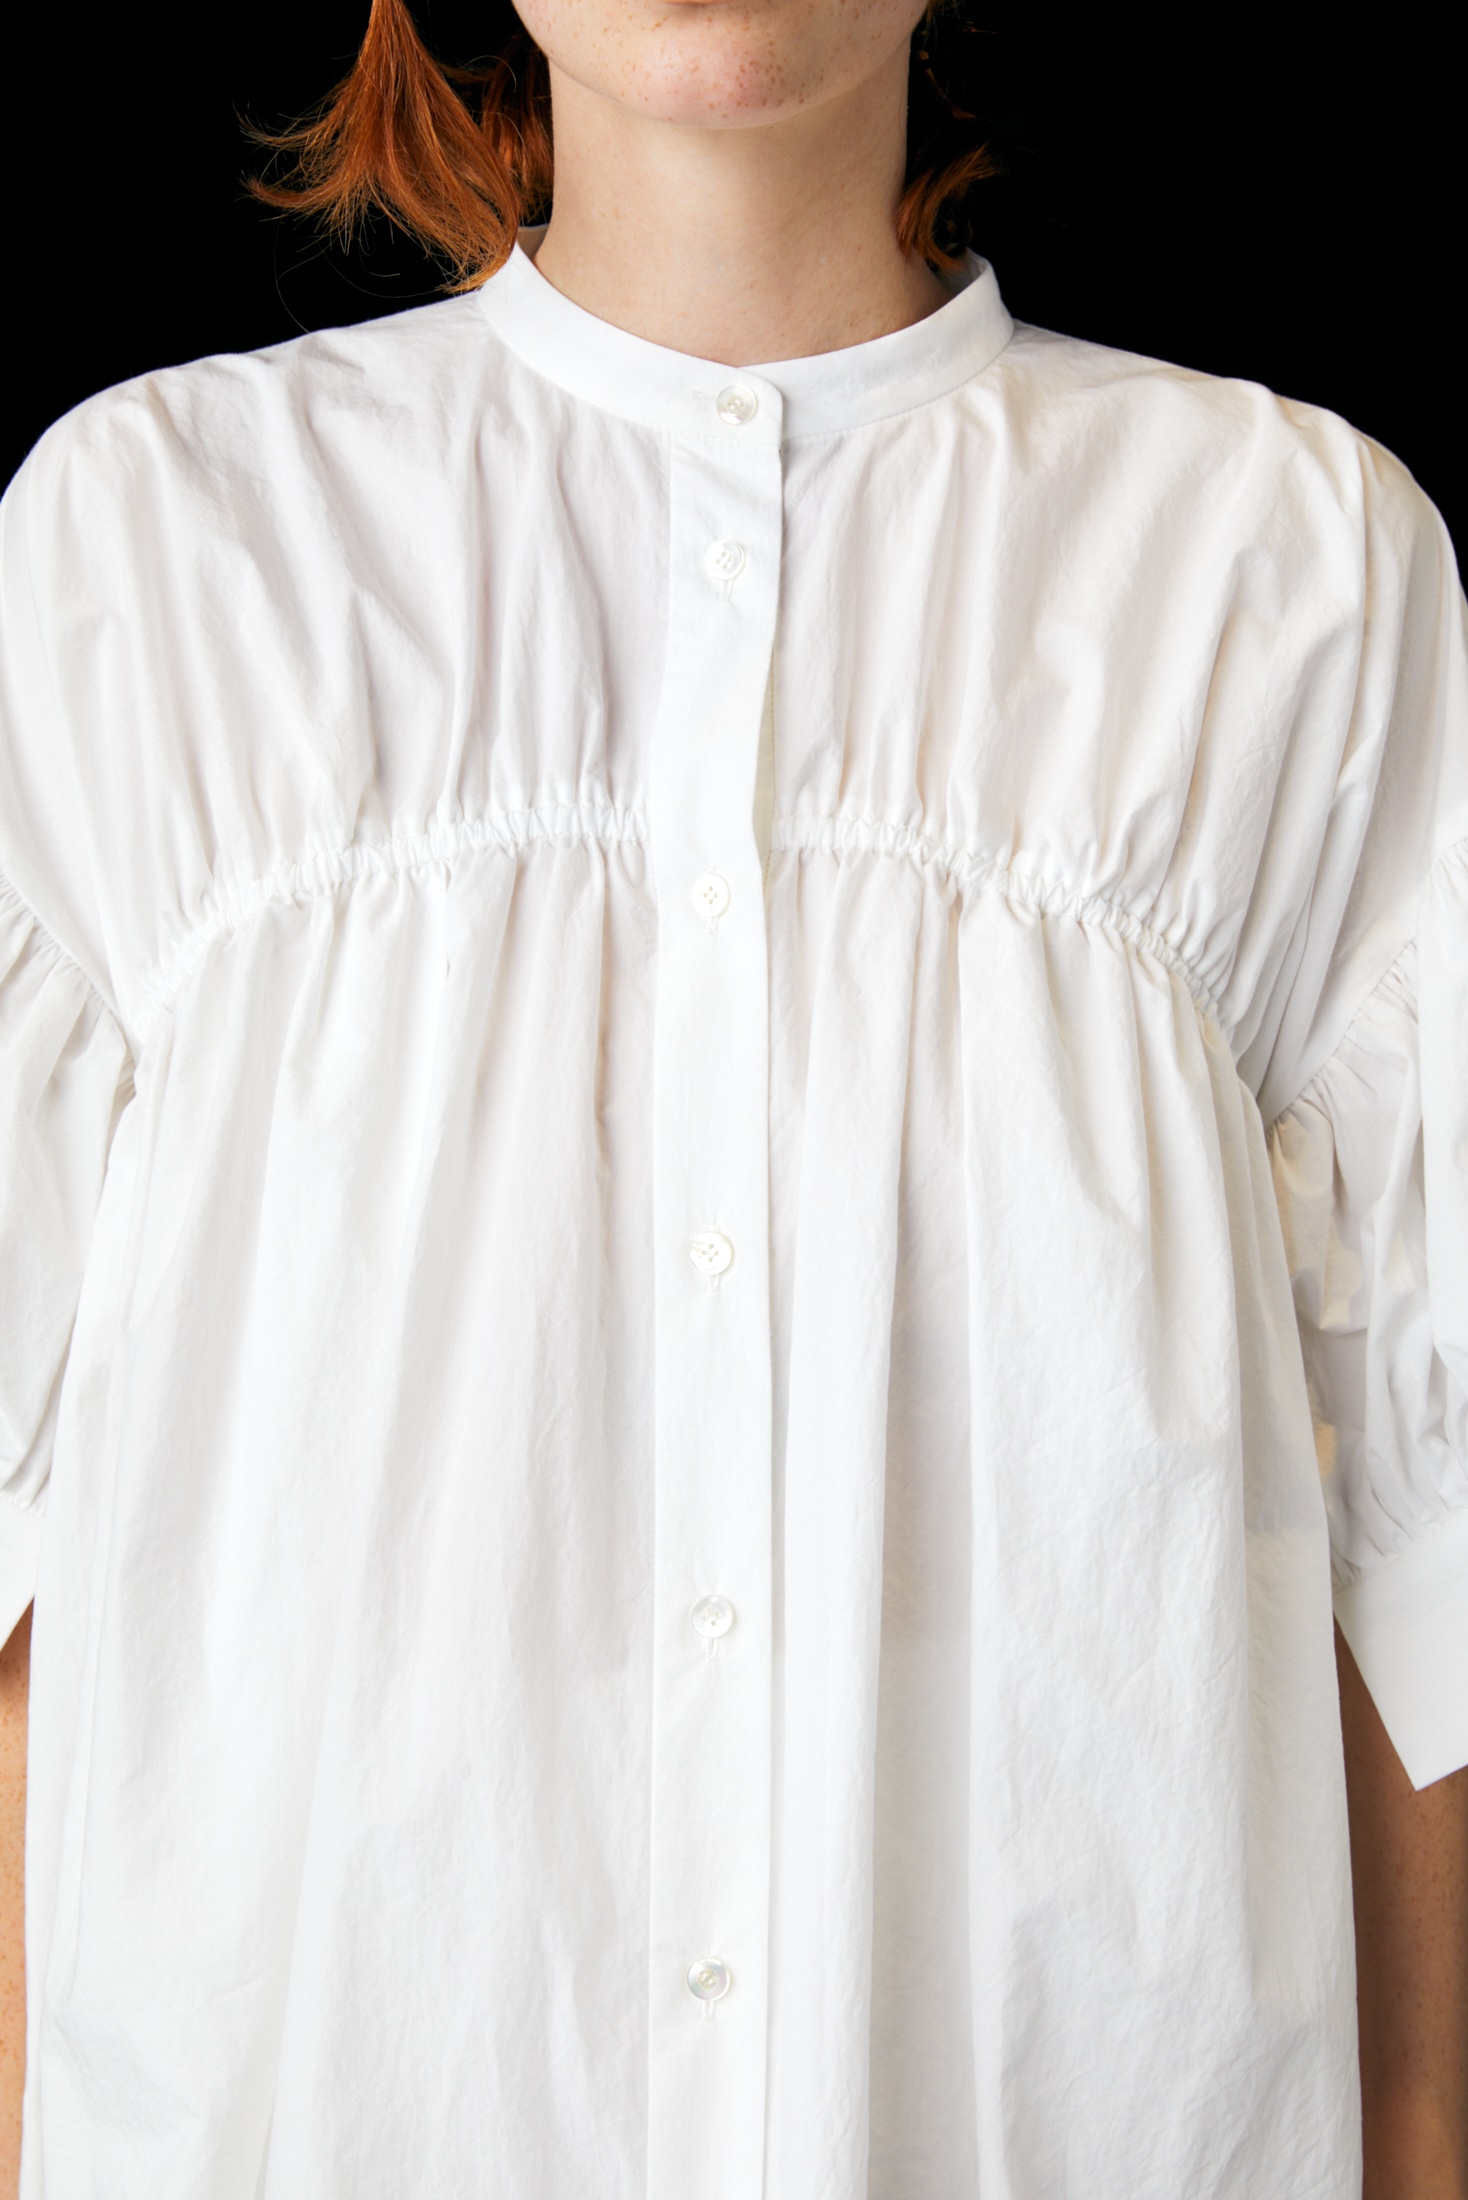 SHIRT｜38｜WHT｜SHIRTS AND BLOUSES｜|ENFÖLD OFFICIAL ONLINE STORE